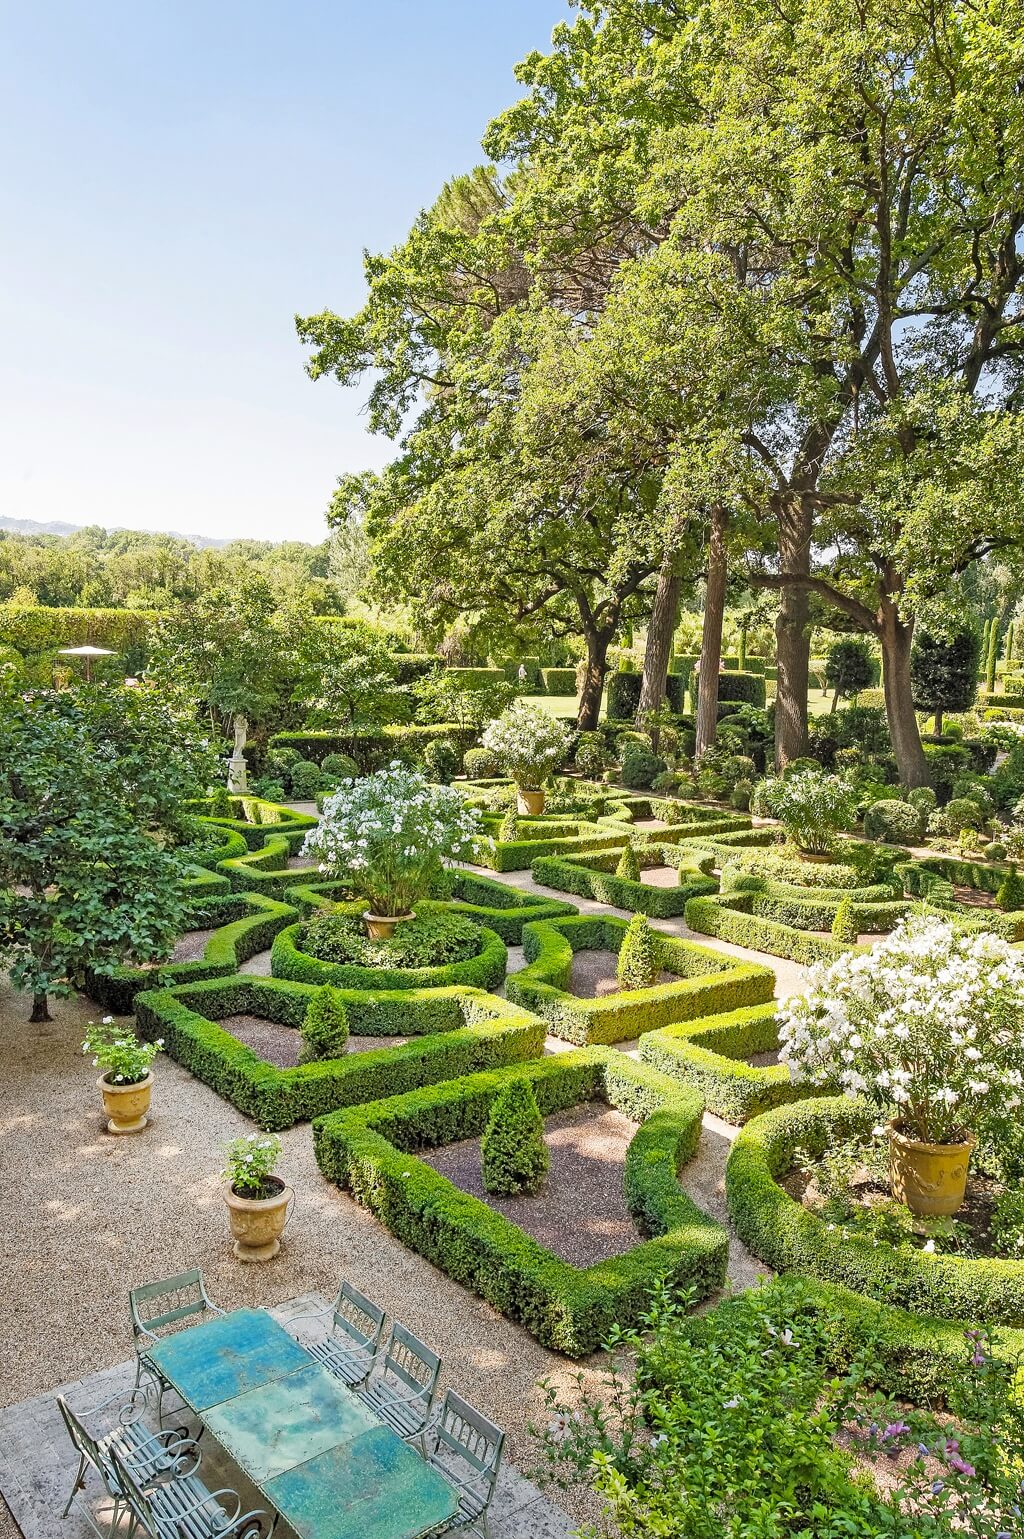 Hello Lovely French Château Mirielle in Provence! Old World style interiors and charming gardens in Provence. #provence #chateau #interiordesign #gardendesign #vacationvilla #luxuryvilla #luxurioushome #frenchcountry #countryfrench #frenchhome